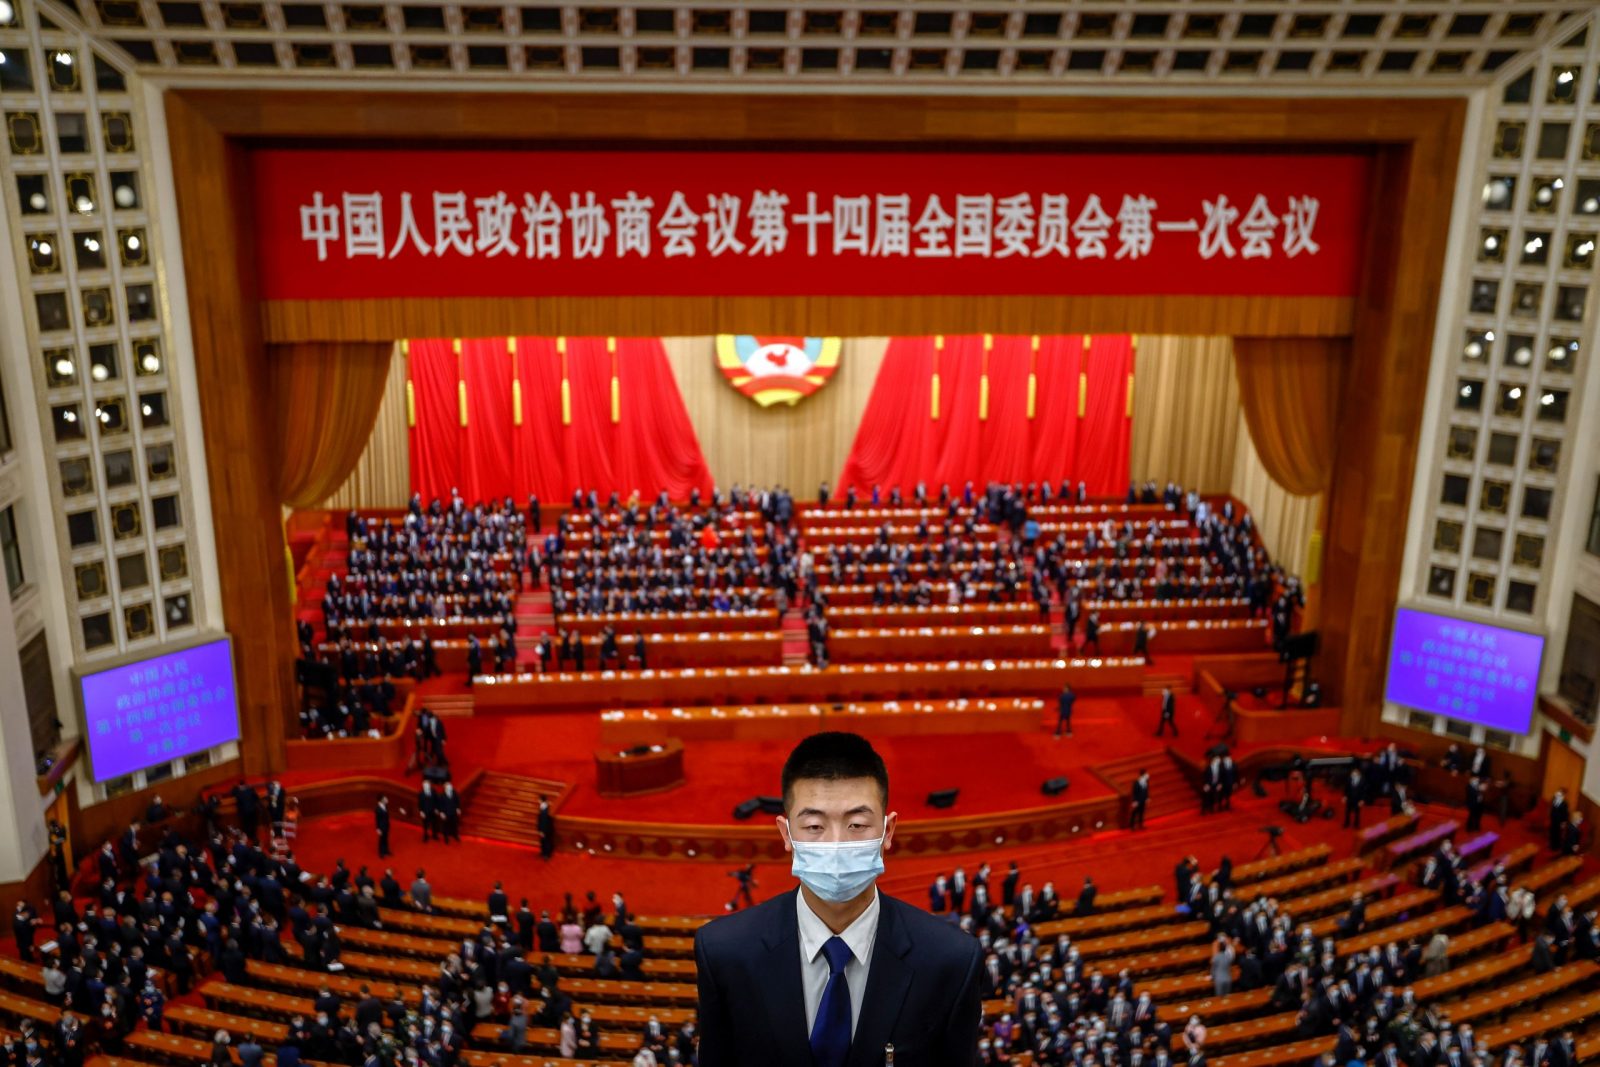 epa10502066 A security member stands guard after the opening session of the Chinese People's Political Consultative Conference (CPPCC) at the Great Hall of the People, in Beijing, China, 04 March 2023. China holds two major annual political meetings, the National People's Congress (NPC) and the Chinese People's Political Consultative Conference (CPPCC) which run alongside and together are known as 'Lianghui' or 'Two Sessions'.  EPA/MARK R. CRISTINO